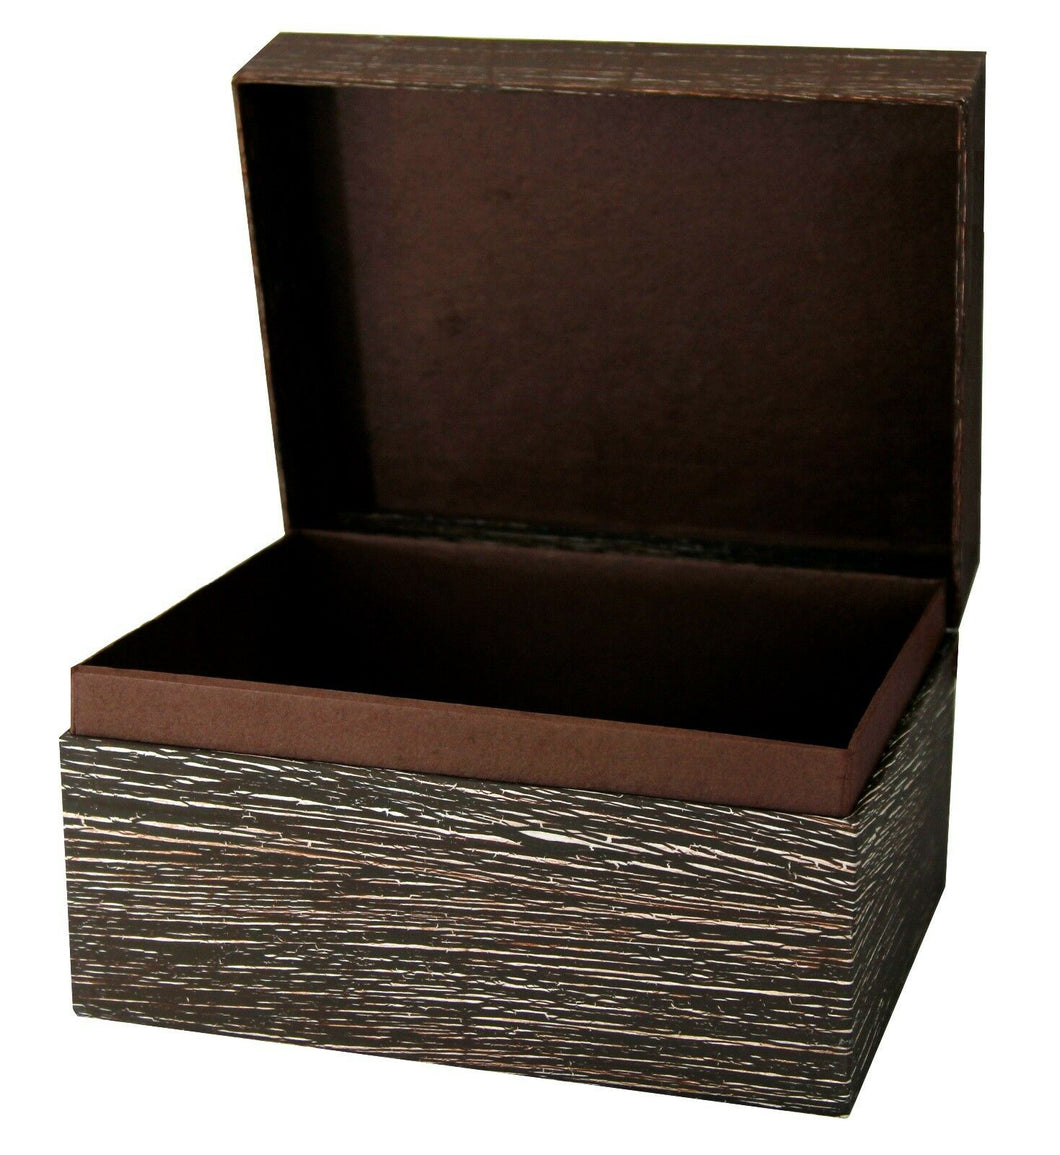 Small/Keepsake 90 Cubic Inch Antique Brown Chest Earthurn Cremation Urn Ashes